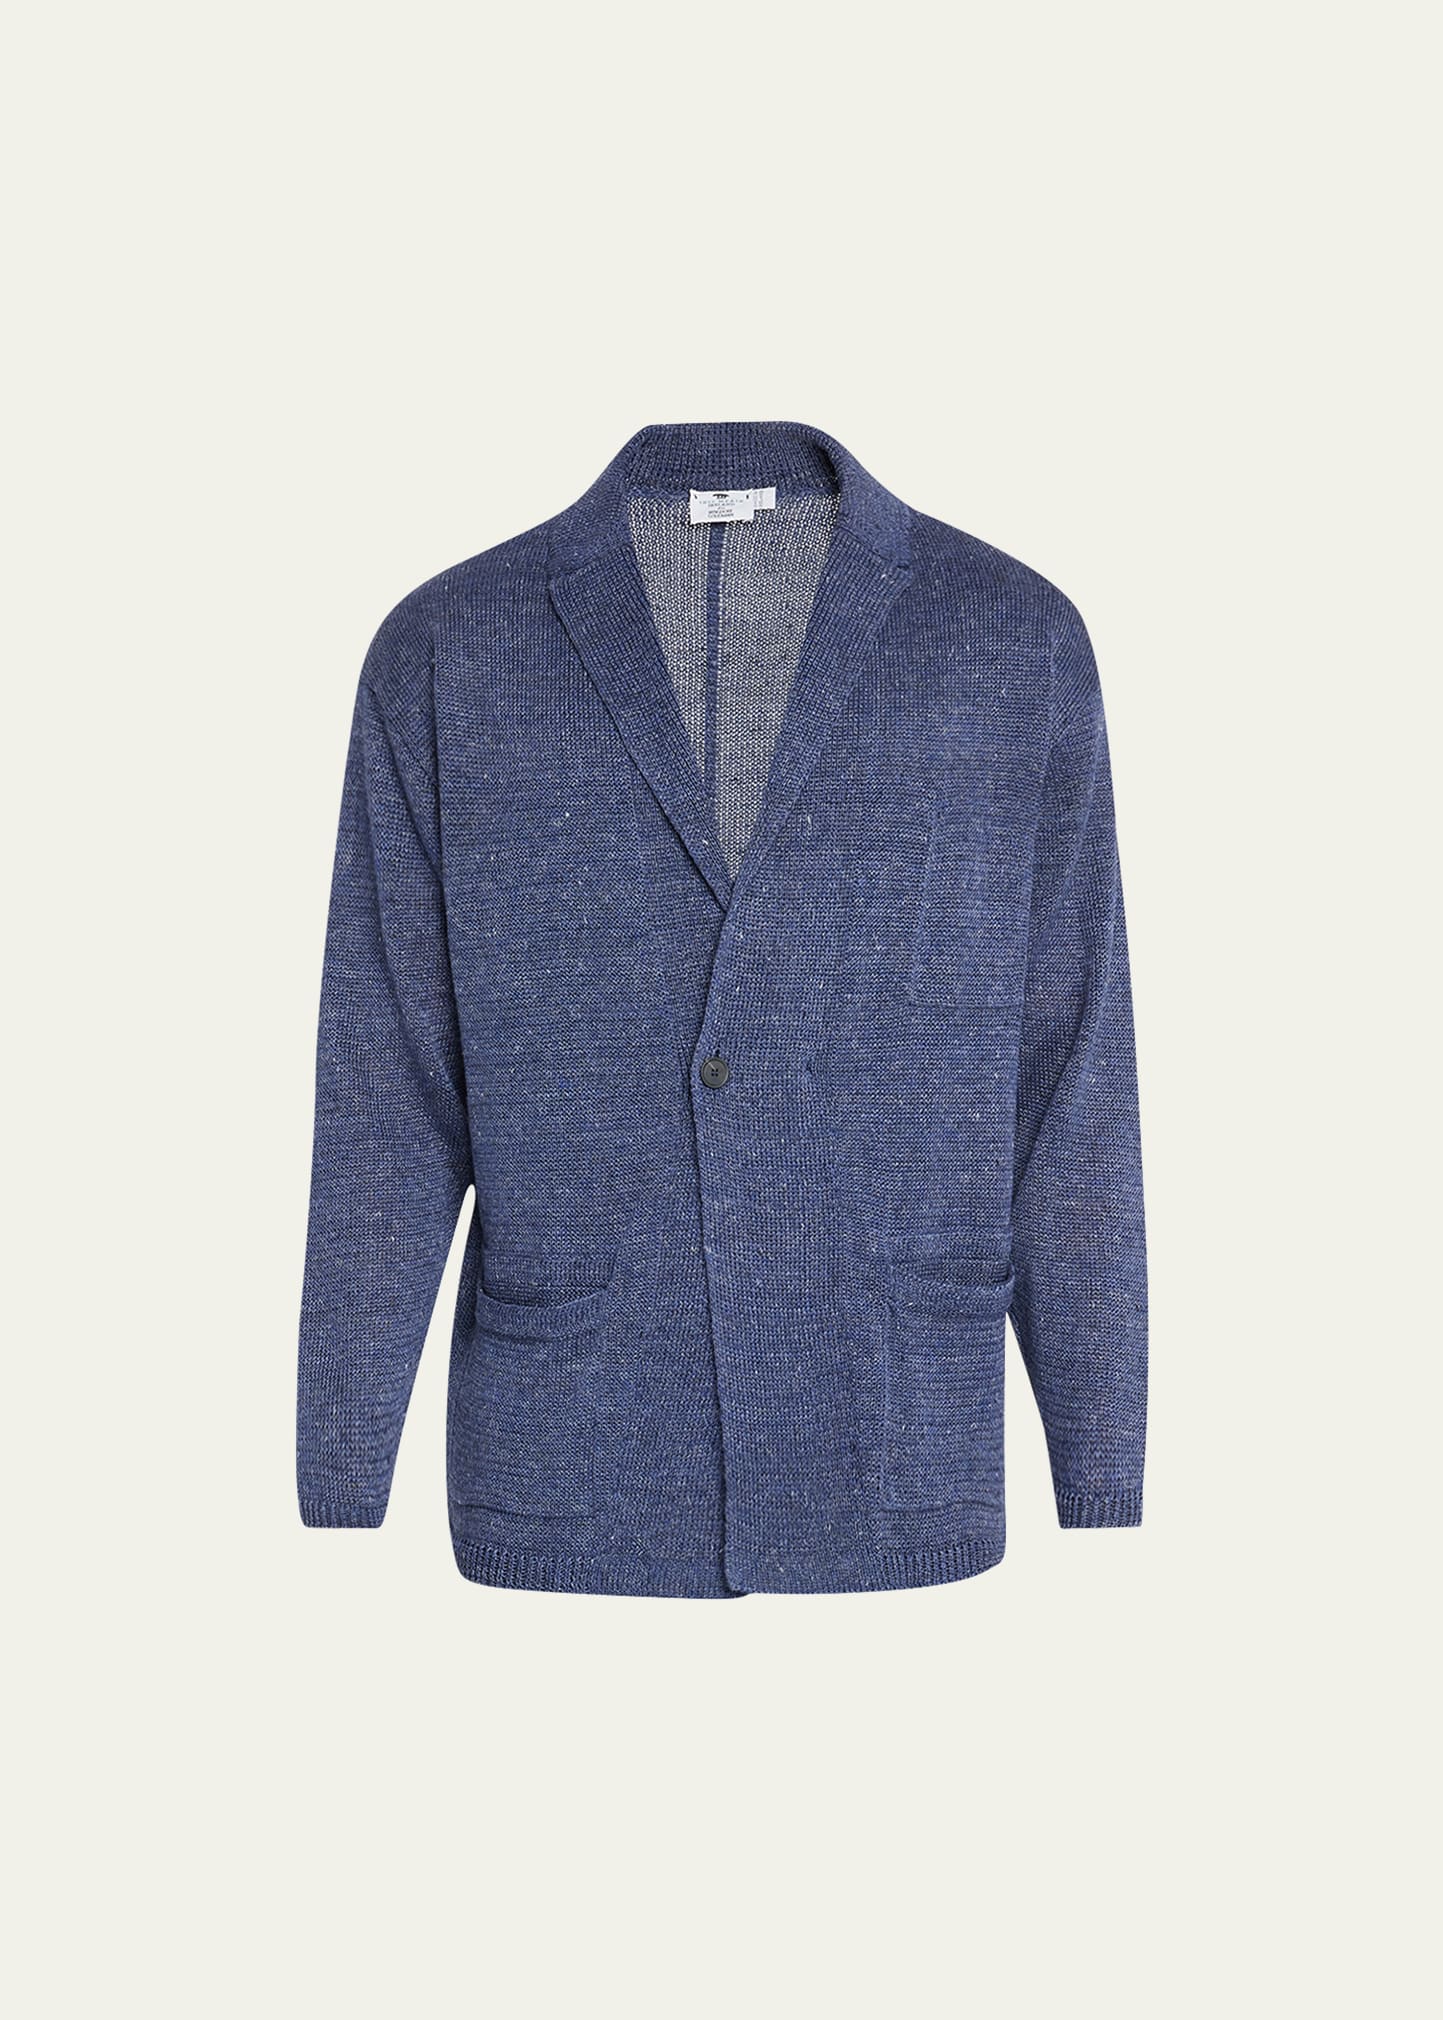 Inis Meain Men's Wool-cashmere Cardigan Sweater In Navy